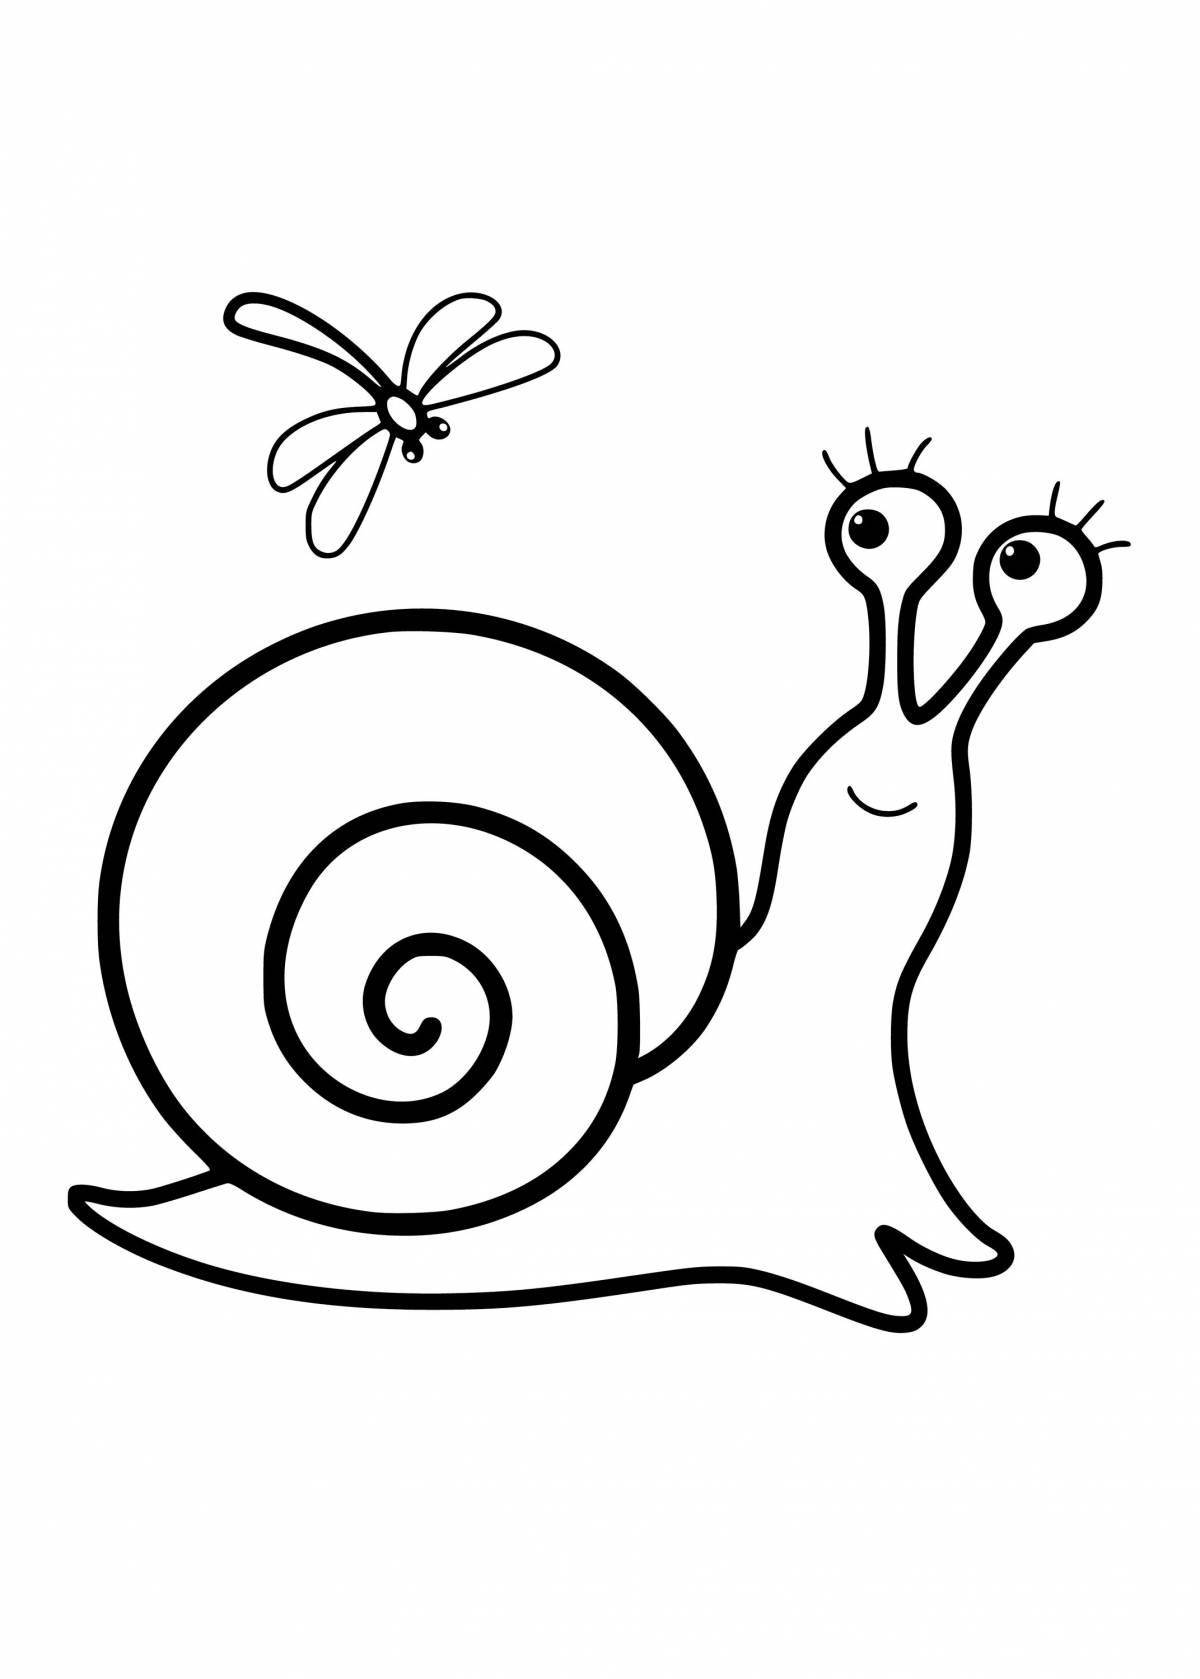 Fancy drawing of a snail for kids